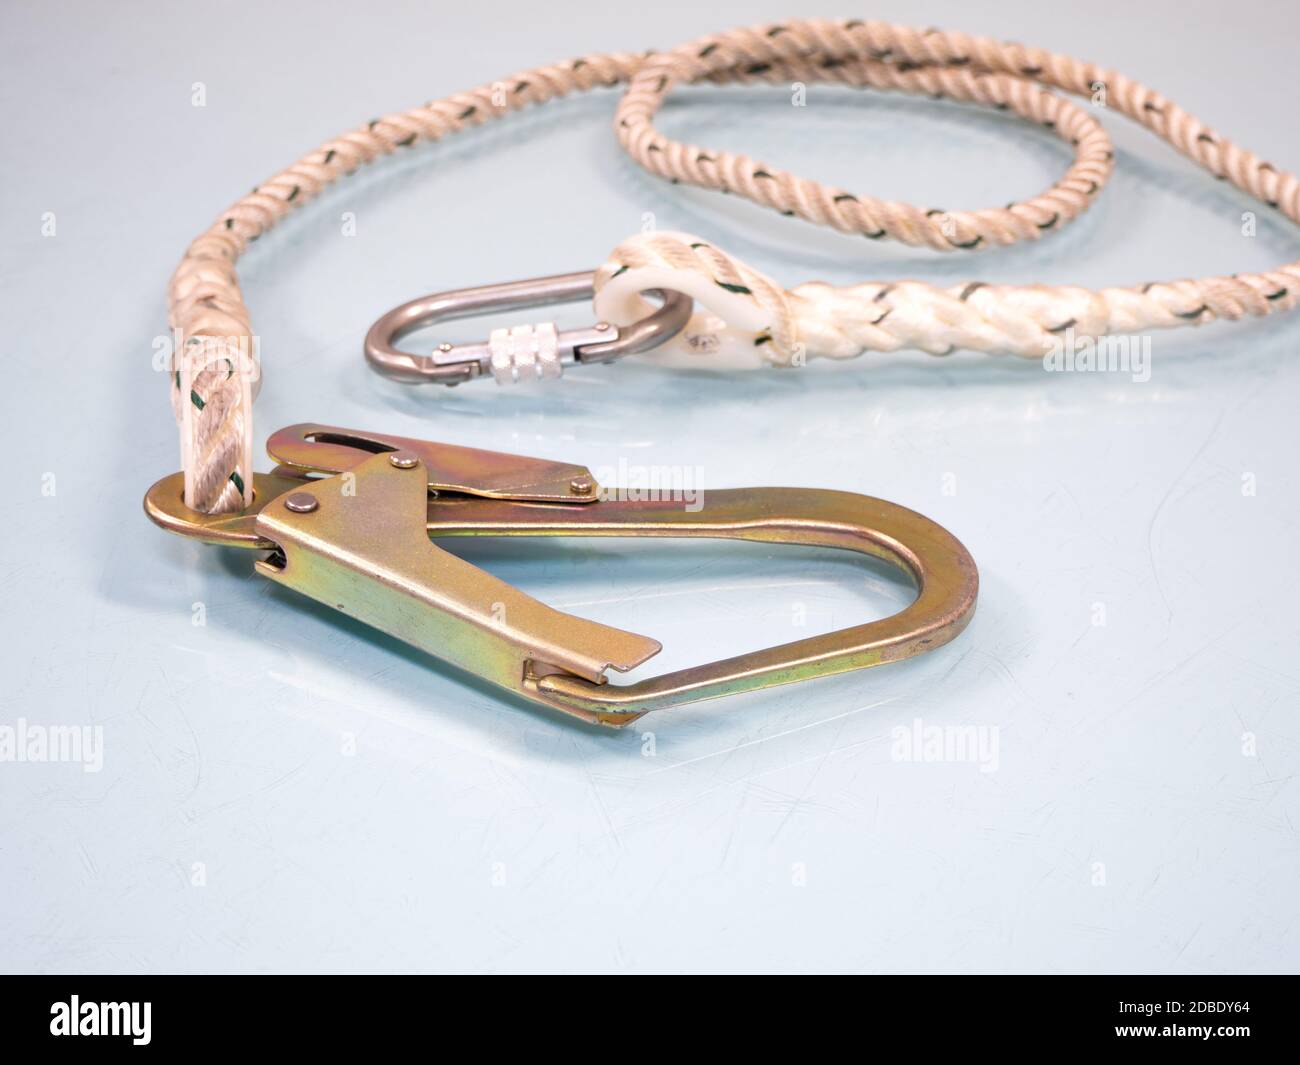 https://c8.alamy.com/comp/2DBDY64/figure-eight-knot-with-carabiner-silver-carabiner-with-lock-andrope-isolated-on-white-background-2DBDY64.jpg